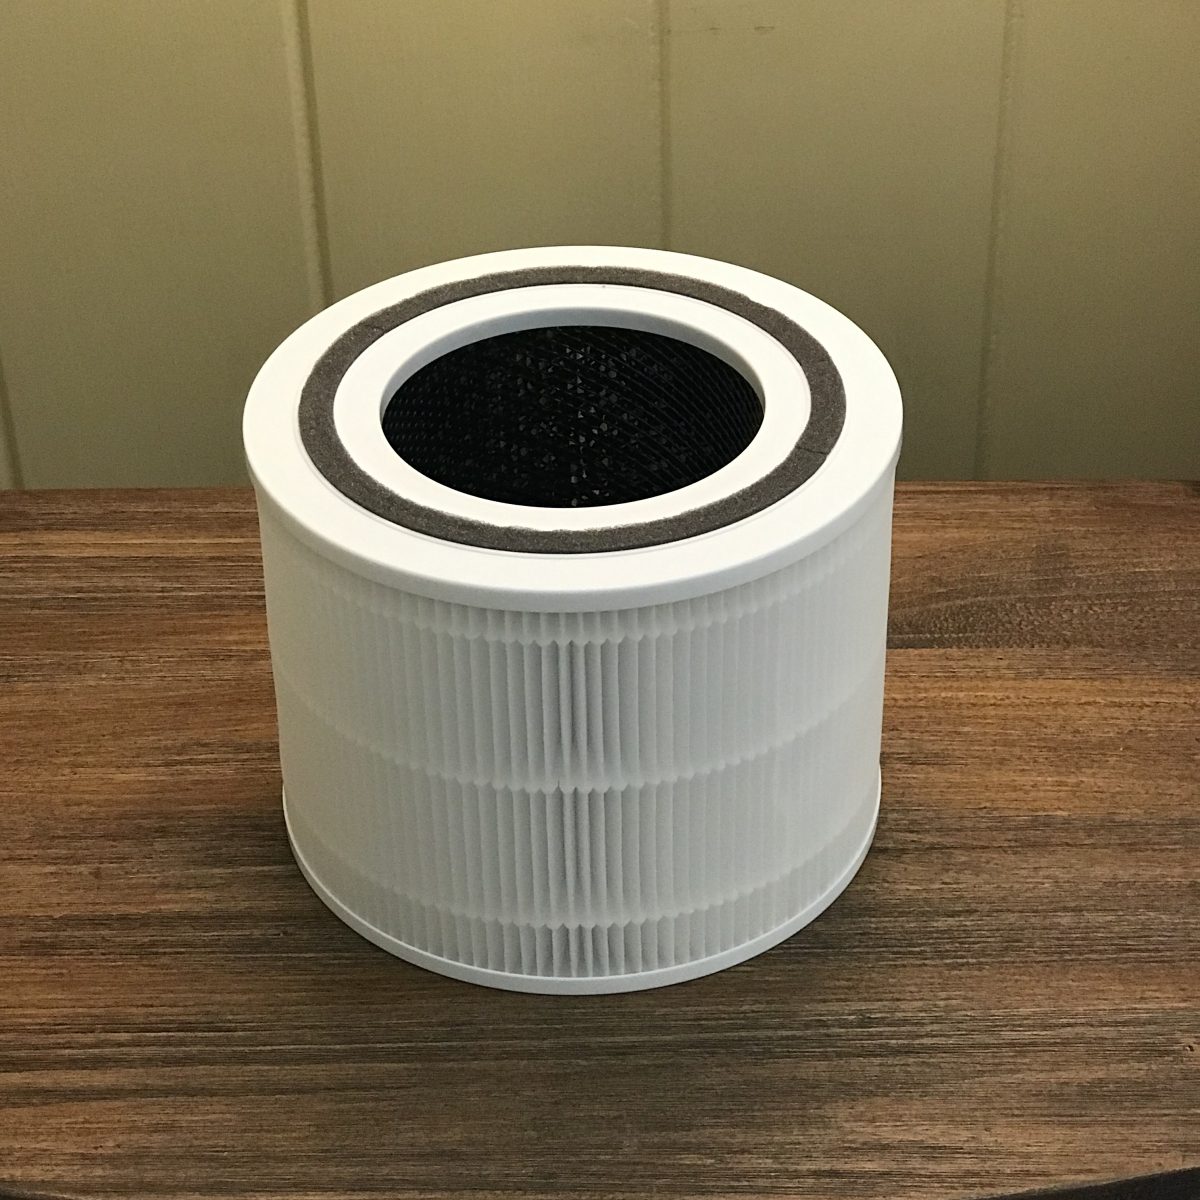 What Type of Air Filters Work Best?